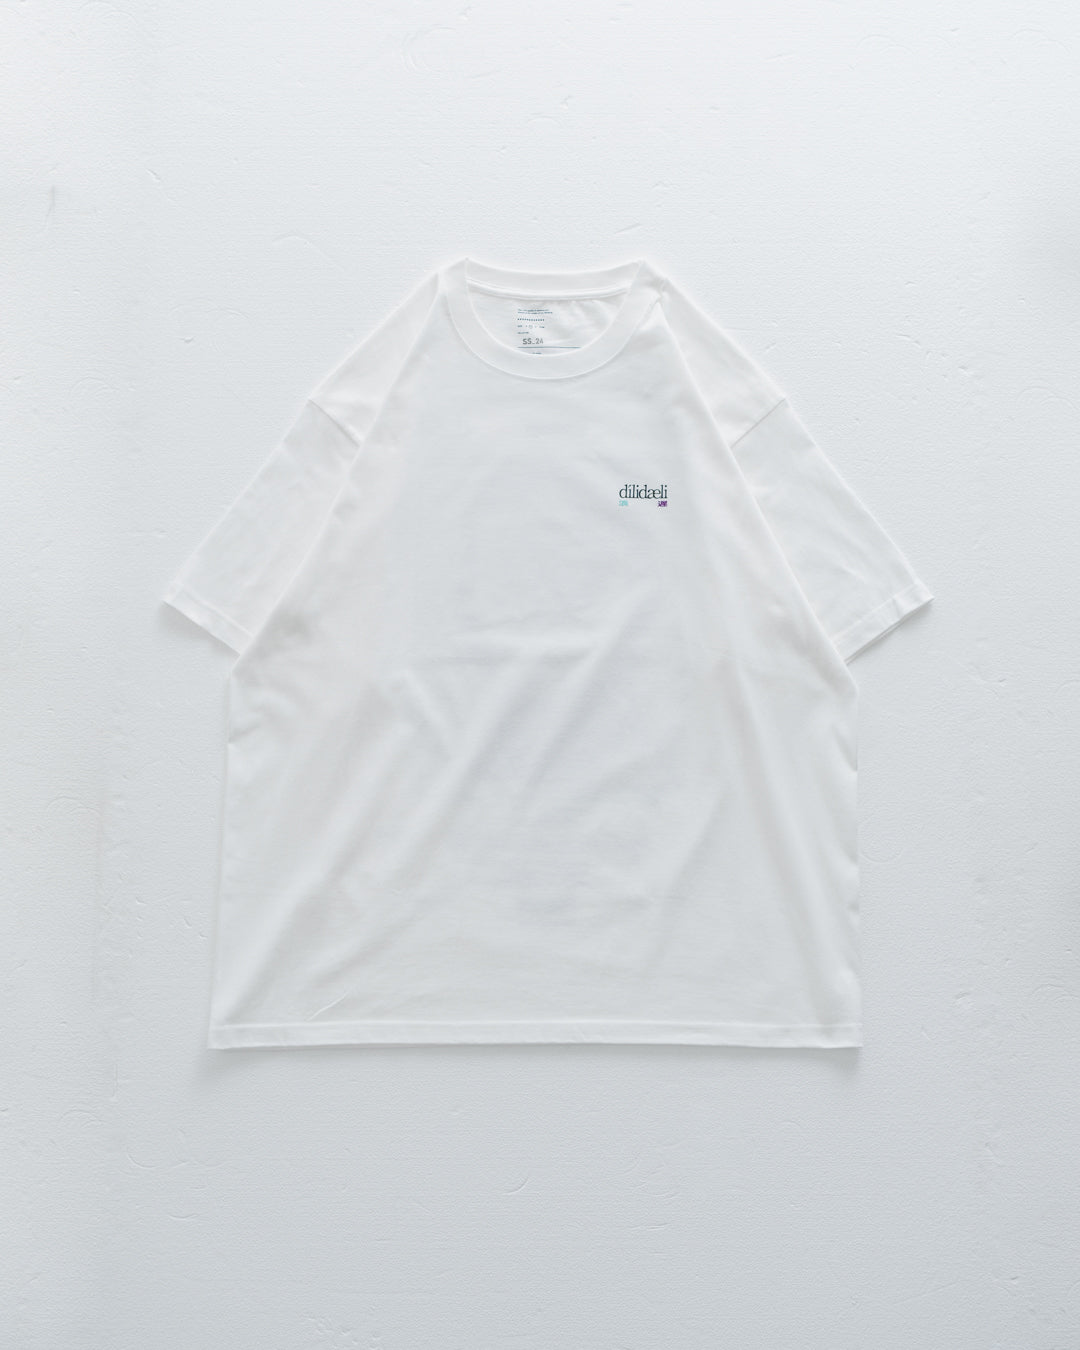 UNTRACE dilly dally TEE SHIRT